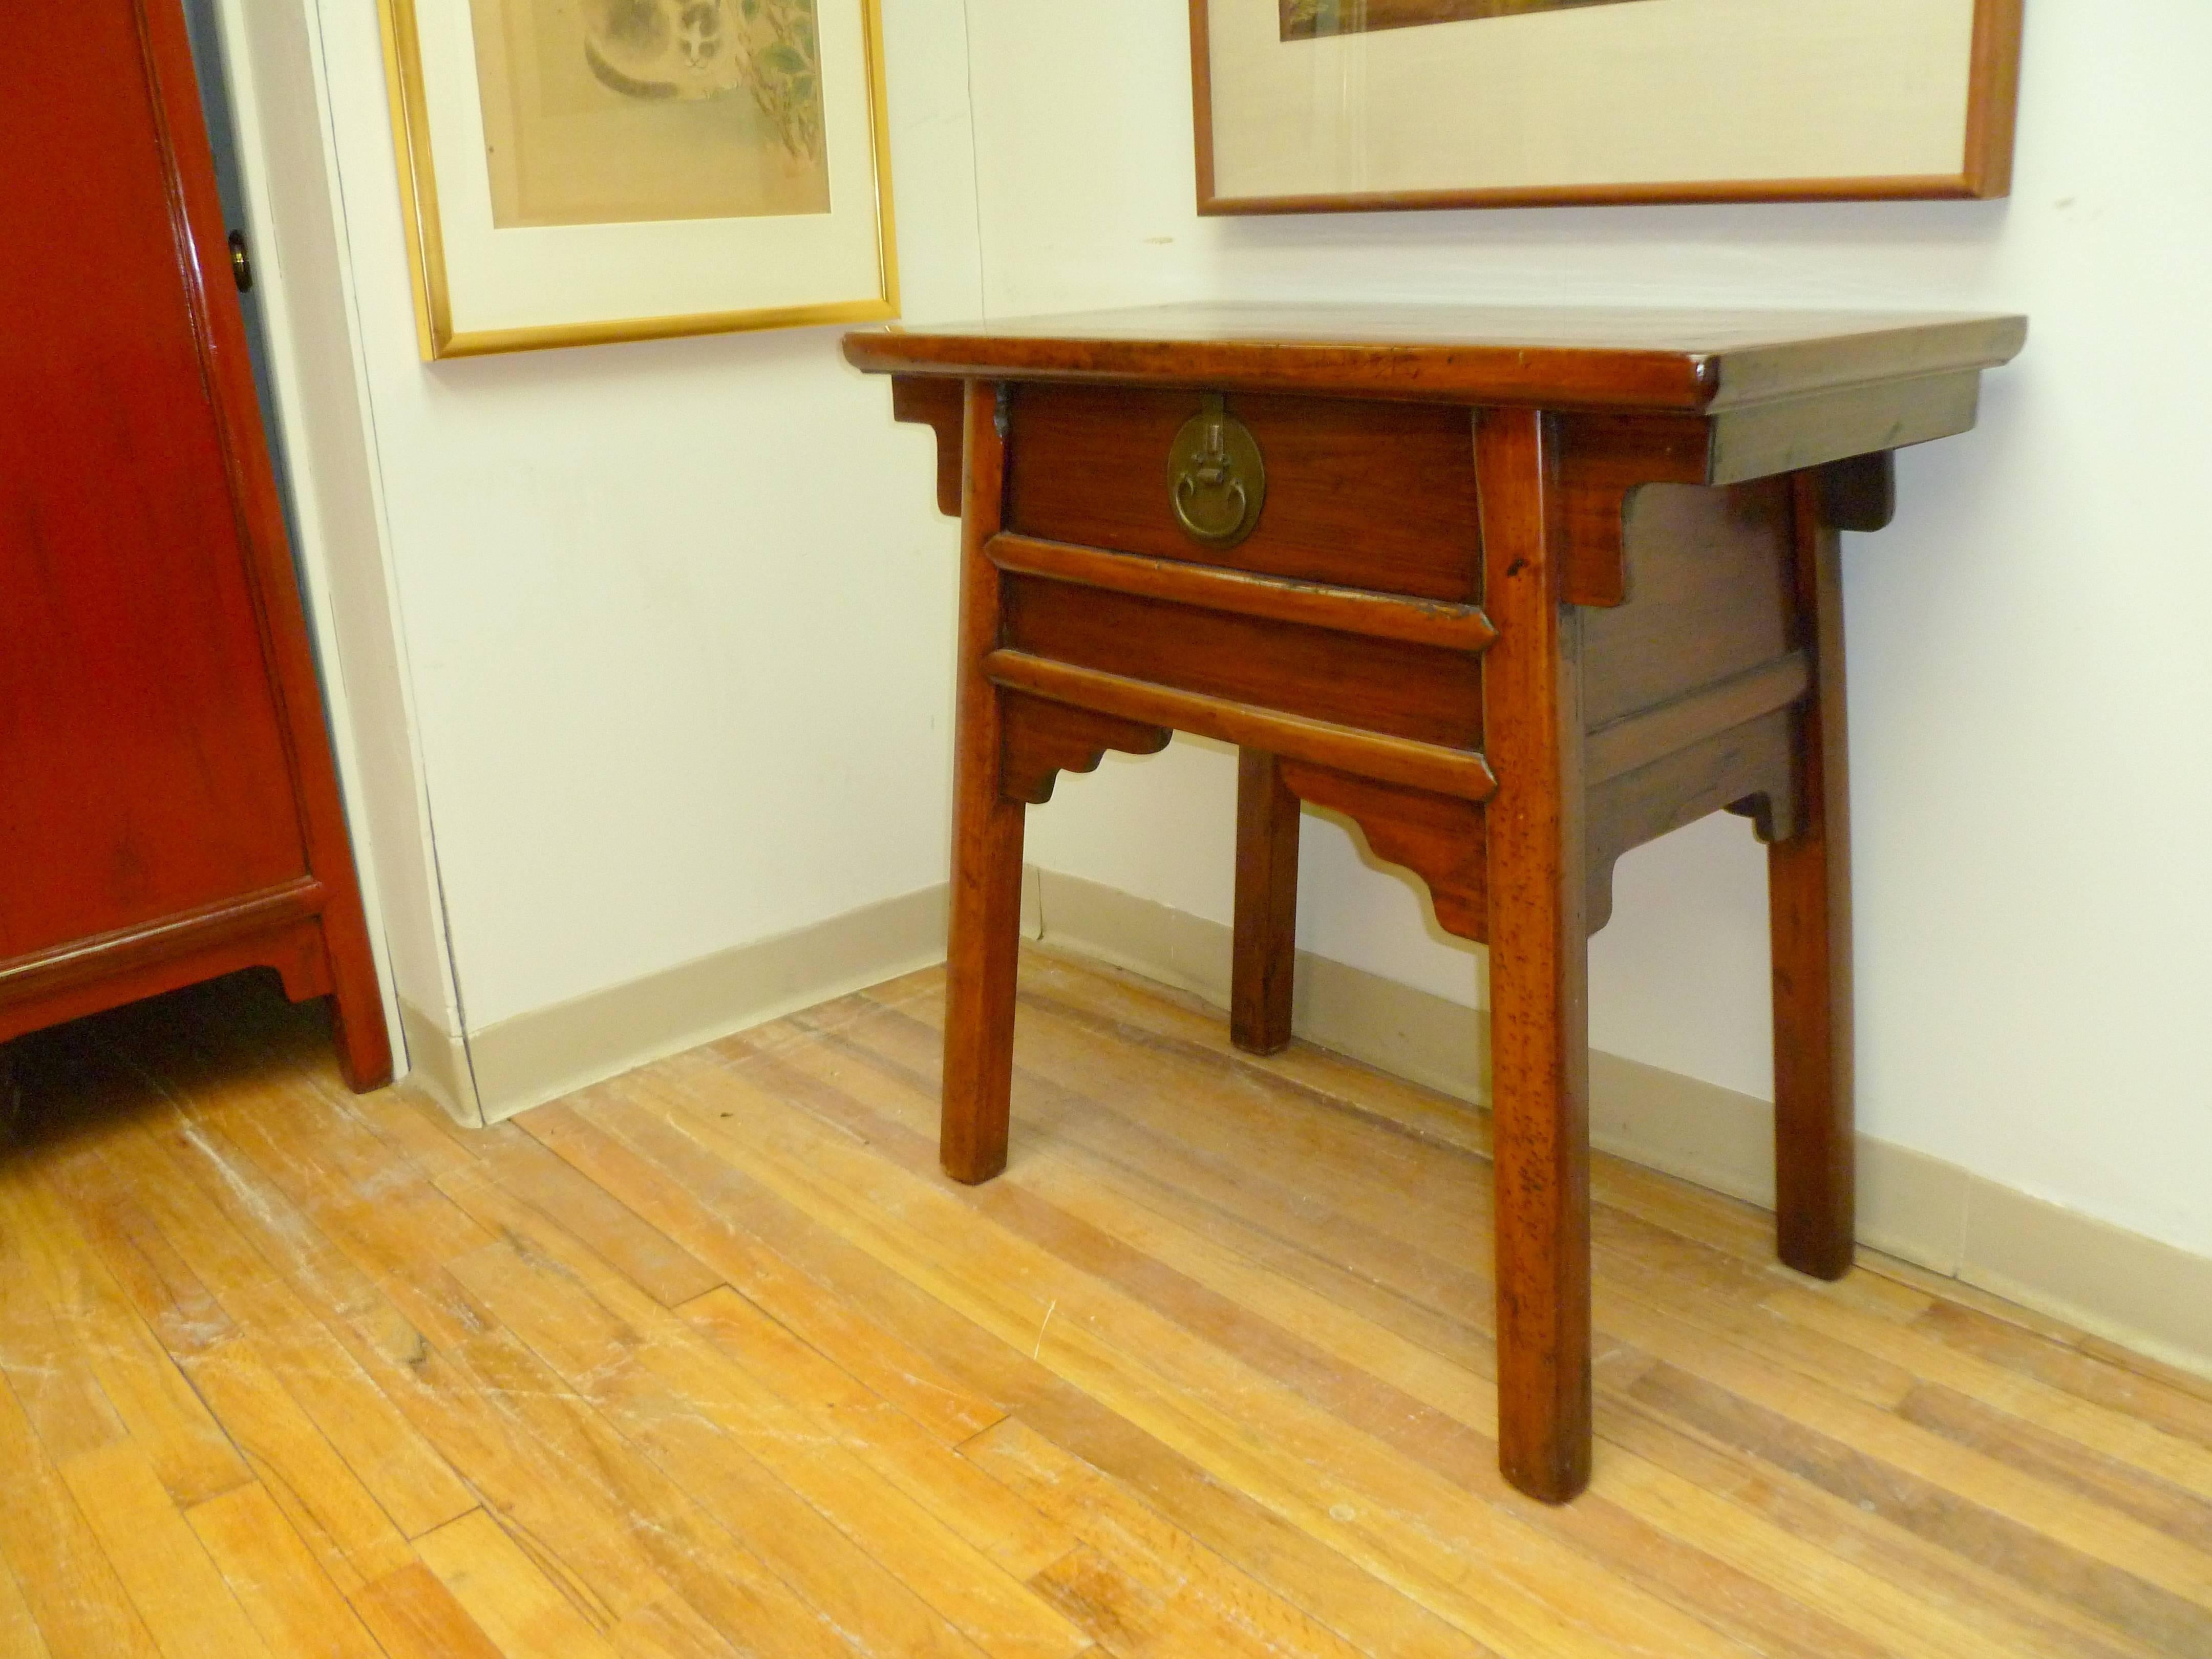 Ming Side Table With A Drawer